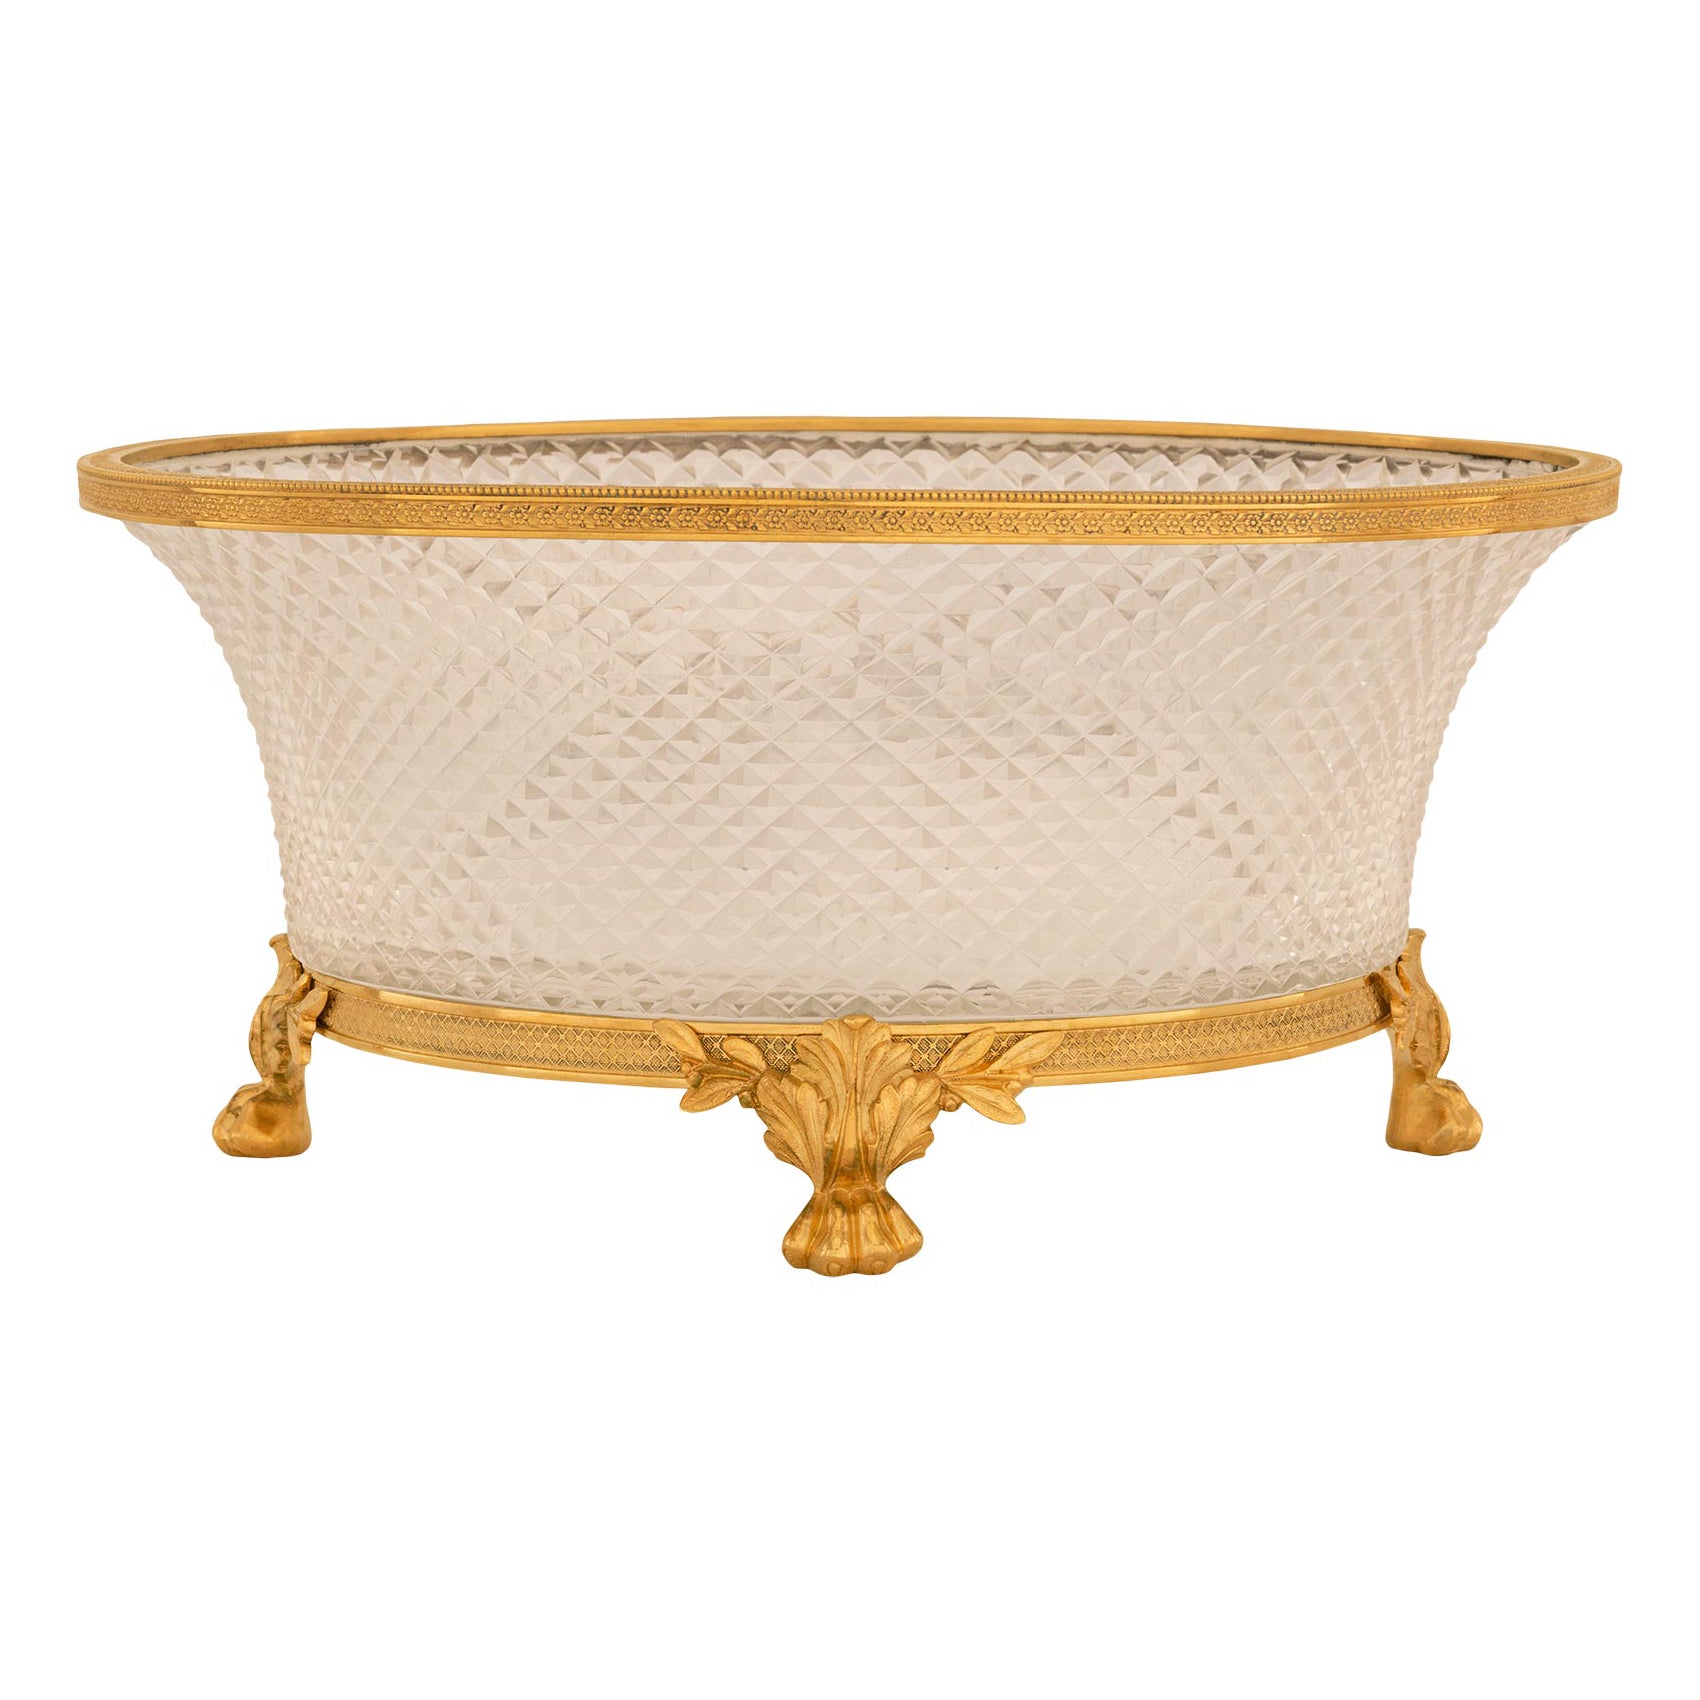 French 19th Century Belle Époque Period Baccarat Crystal and Ormolu Centerpiece For Sale